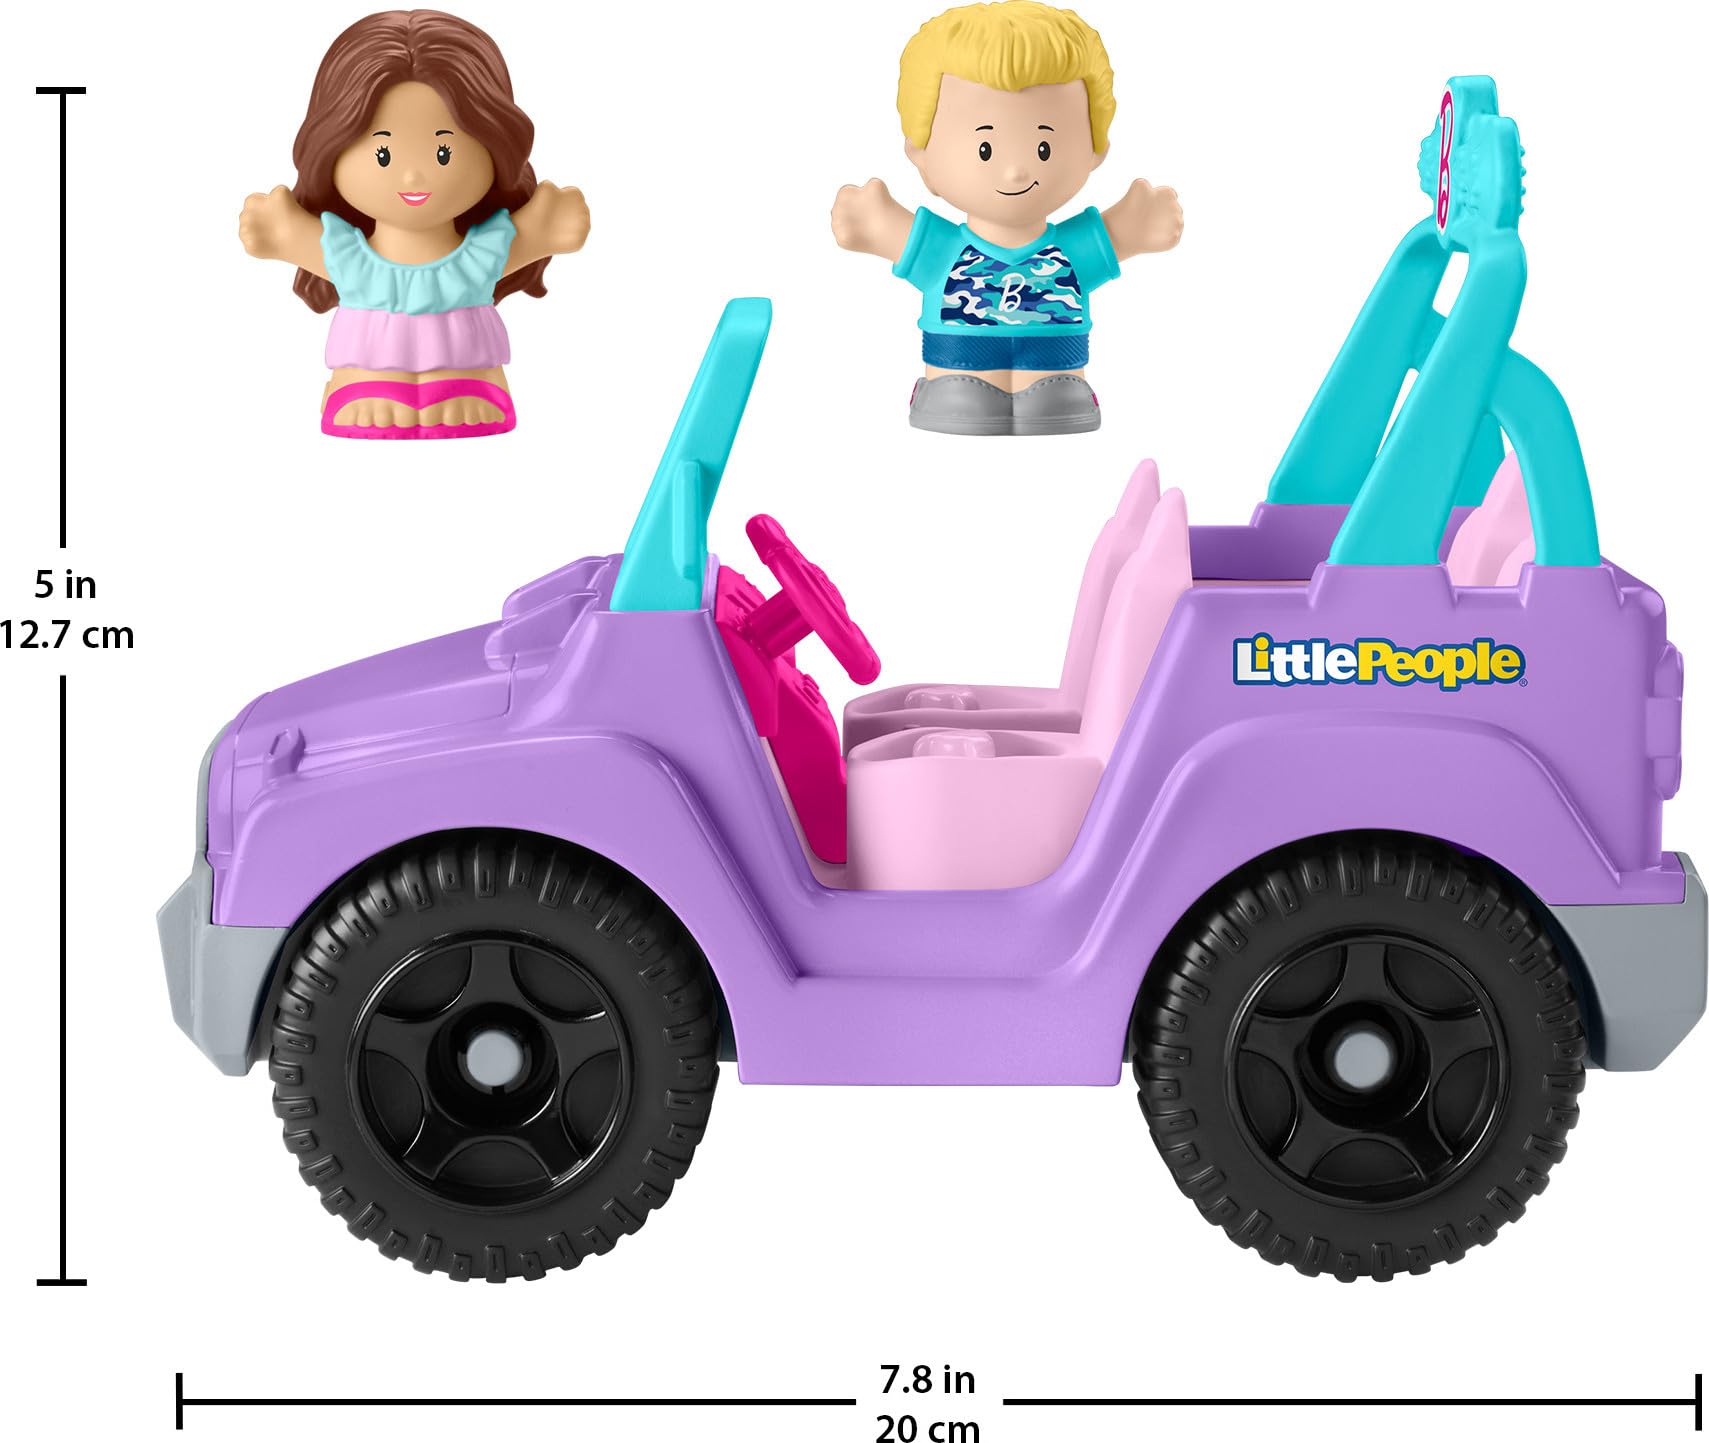 Little People Barbie Toy Car Beach Cruiser with Music Sounds and 2 Figures for Pretend Play Ages 18+ Months